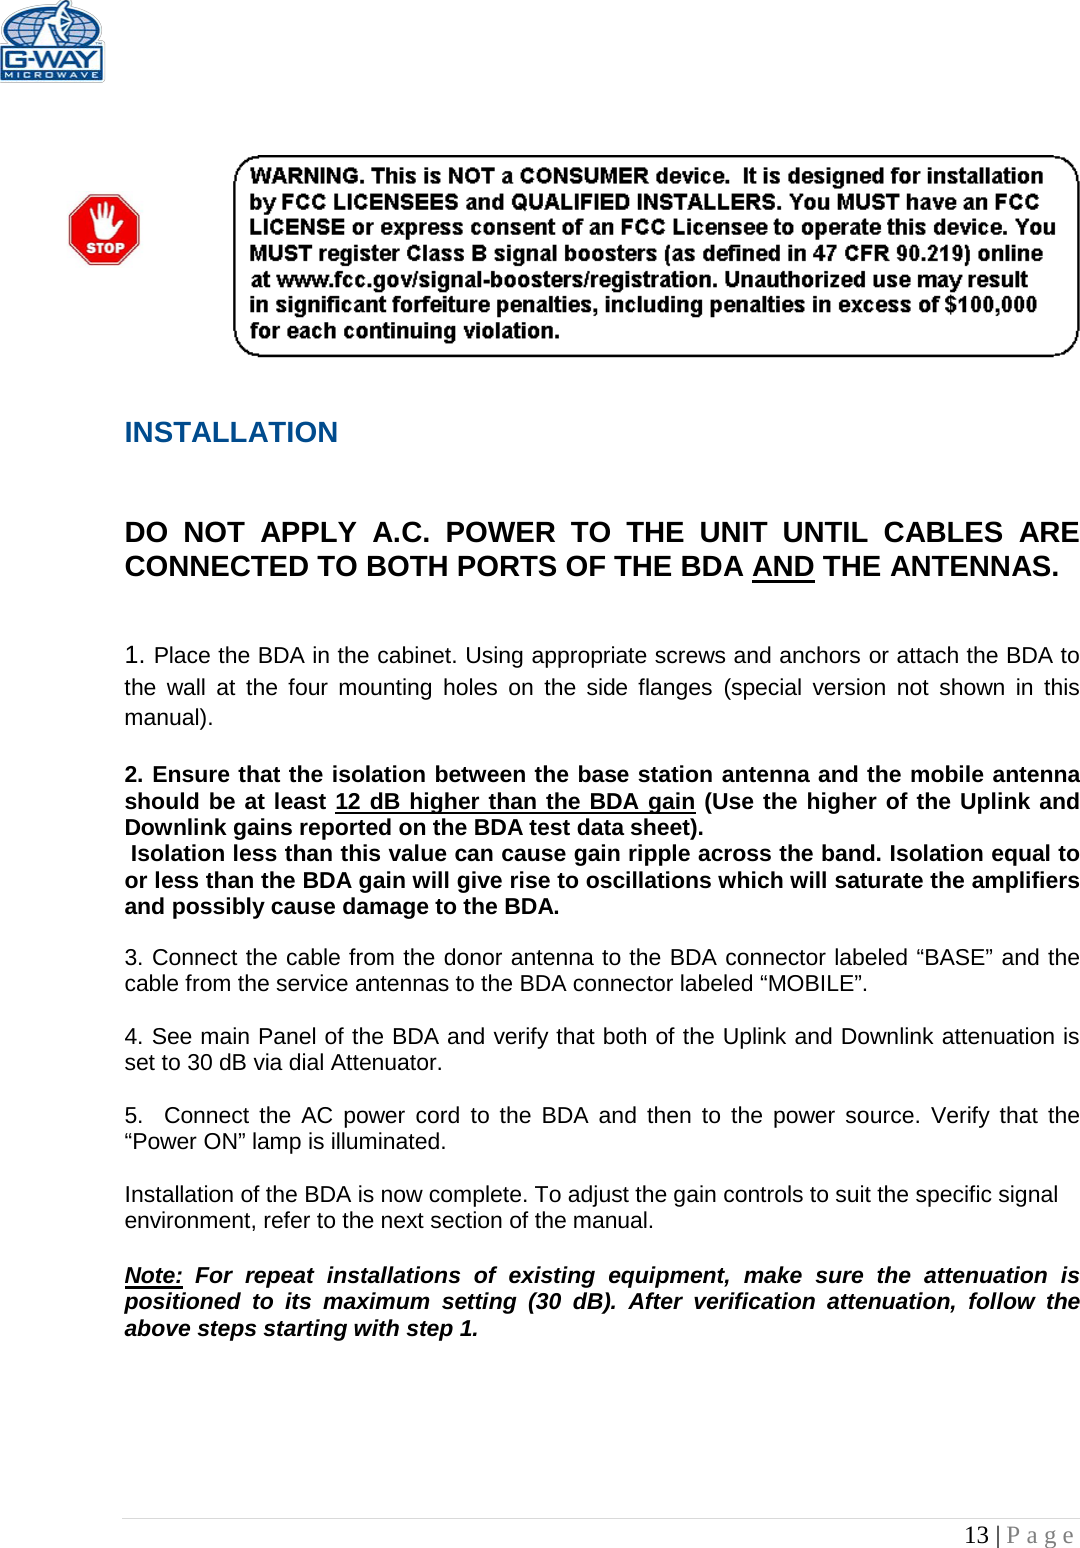   13 | Page     INSTALLATION   DO NOT APPLY A.C. POWER TO THE UNIT UNTIL CABLES ARE CONNECTED TO BOTH PORTS OF THE BDA AND THE ANTENNAS.    1. Place the BDA in the cabinet. Using appropriate screws and anchors or attach the BDA to the wall at the four mounting holes on the side flanges  (special version not shown in this manual).  2. Ensure that the isolation between the base station antenna and the mobile antenna should be at least 12 dB higher than the BDA gain (Use the higher of the Uplink and Downlink gains reported on the BDA test data sheet).  Isolation less than this value can cause gain ripple across the band. Isolation equal to or less than the BDA gain will give rise to oscillations which will saturate the amplifiers and possibly cause damage to the BDA.   3. Connect the cable from the donor antenna to the BDA connector labeled “BASE” and the cable from the service antennas to the BDA connector labeled “MOBILE”.  4. See main Panel of the BDA and verify that both of the Uplink and Downlink attenuation is set to 30 dB via dial Attenuator.    5.  Connect the AC power cord to the BDA and then to the power source. Verify that the “Power ON” lamp is illuminated.   Installation of the BDA is now complete. To adjust the gain controls to suit the specific signal environment, refer to the next section of the manual.  Note: For repeat installations of existing equipment, make sure the attenuation is positioned to its maximum setting (30 dB). After verification attenuation, follow the above steps starting with step 1.     